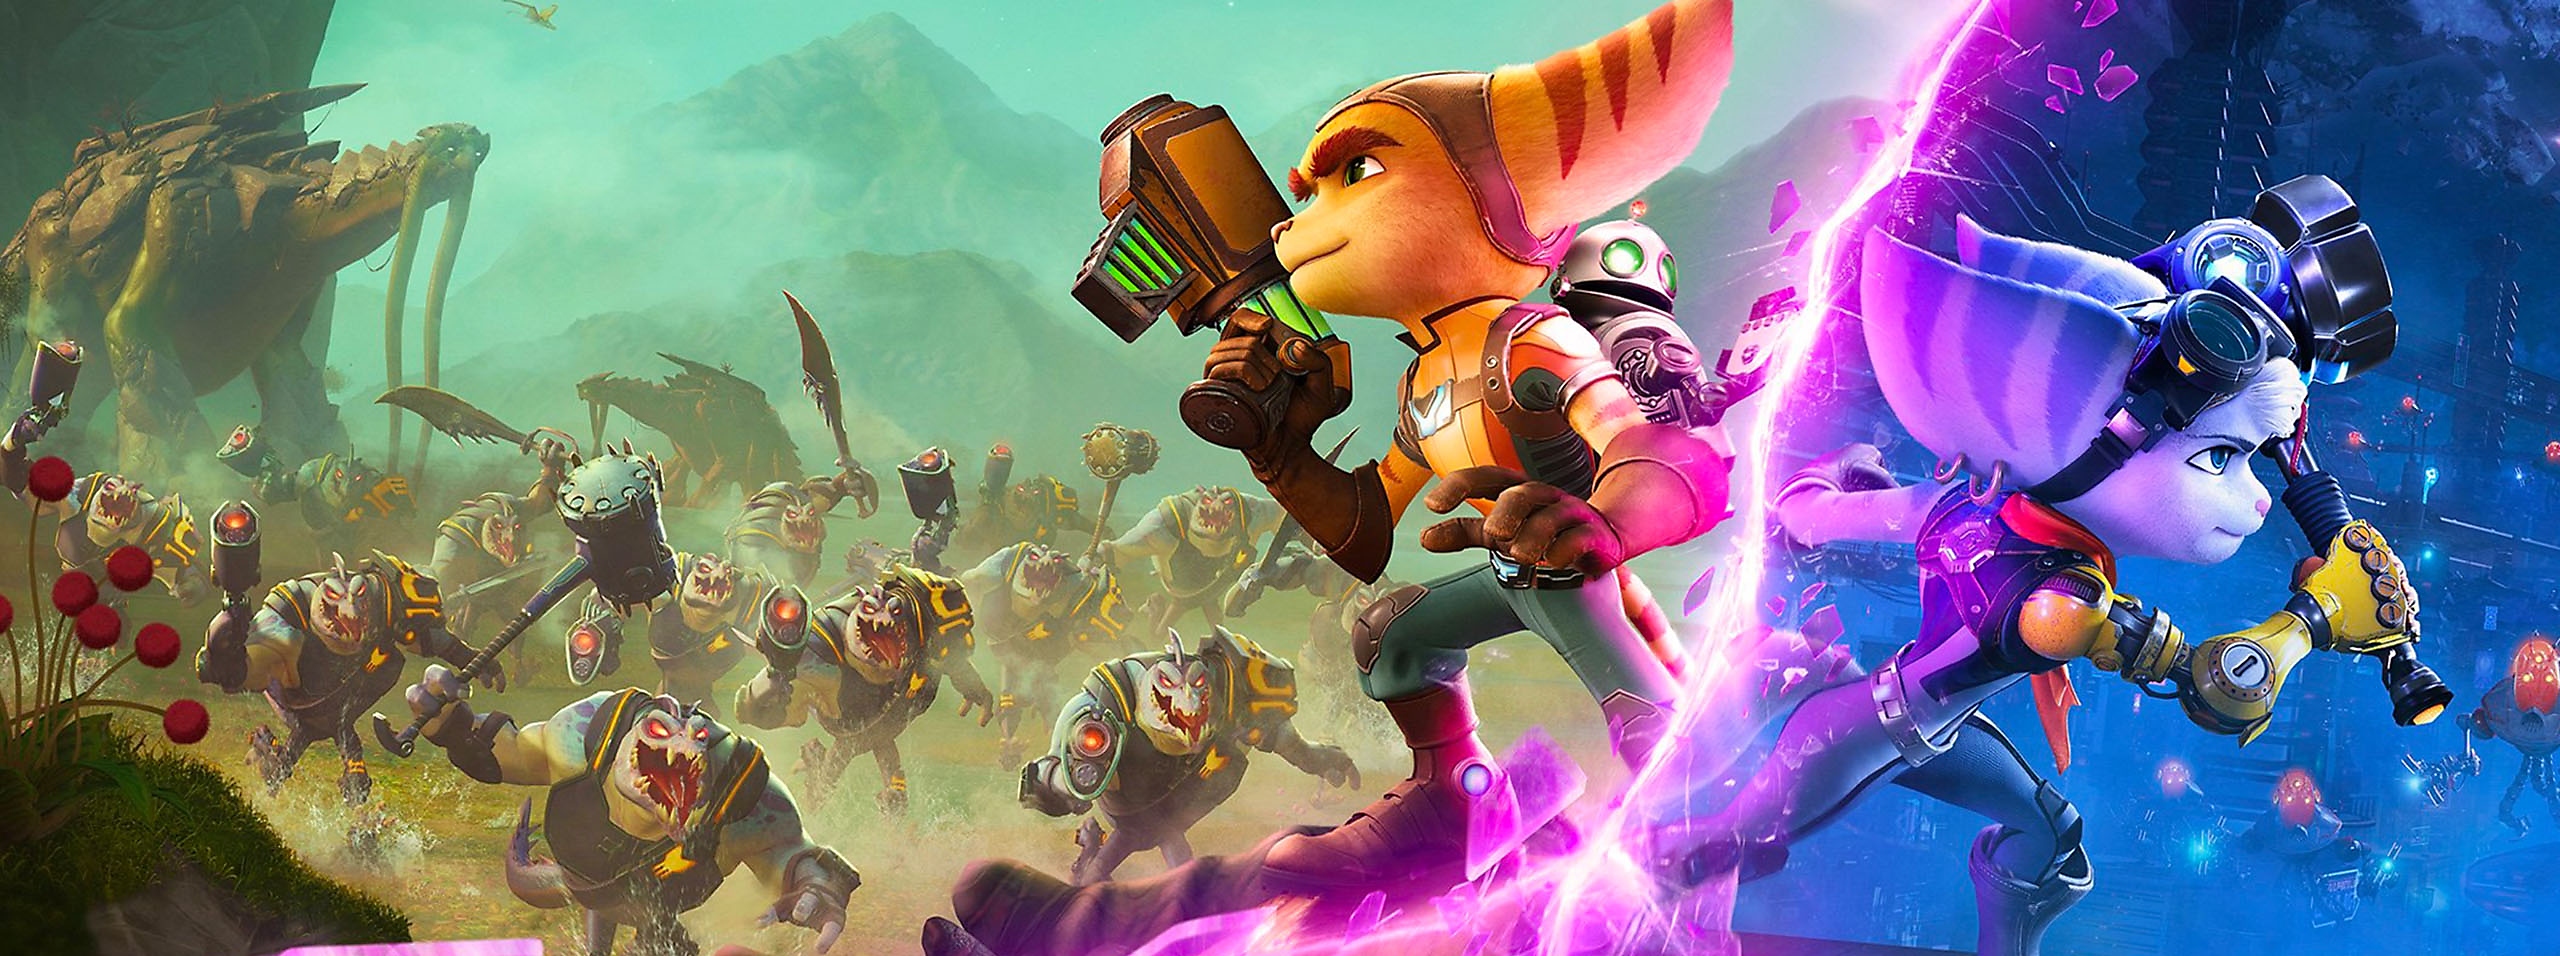 Ratchet & Clank – bohater